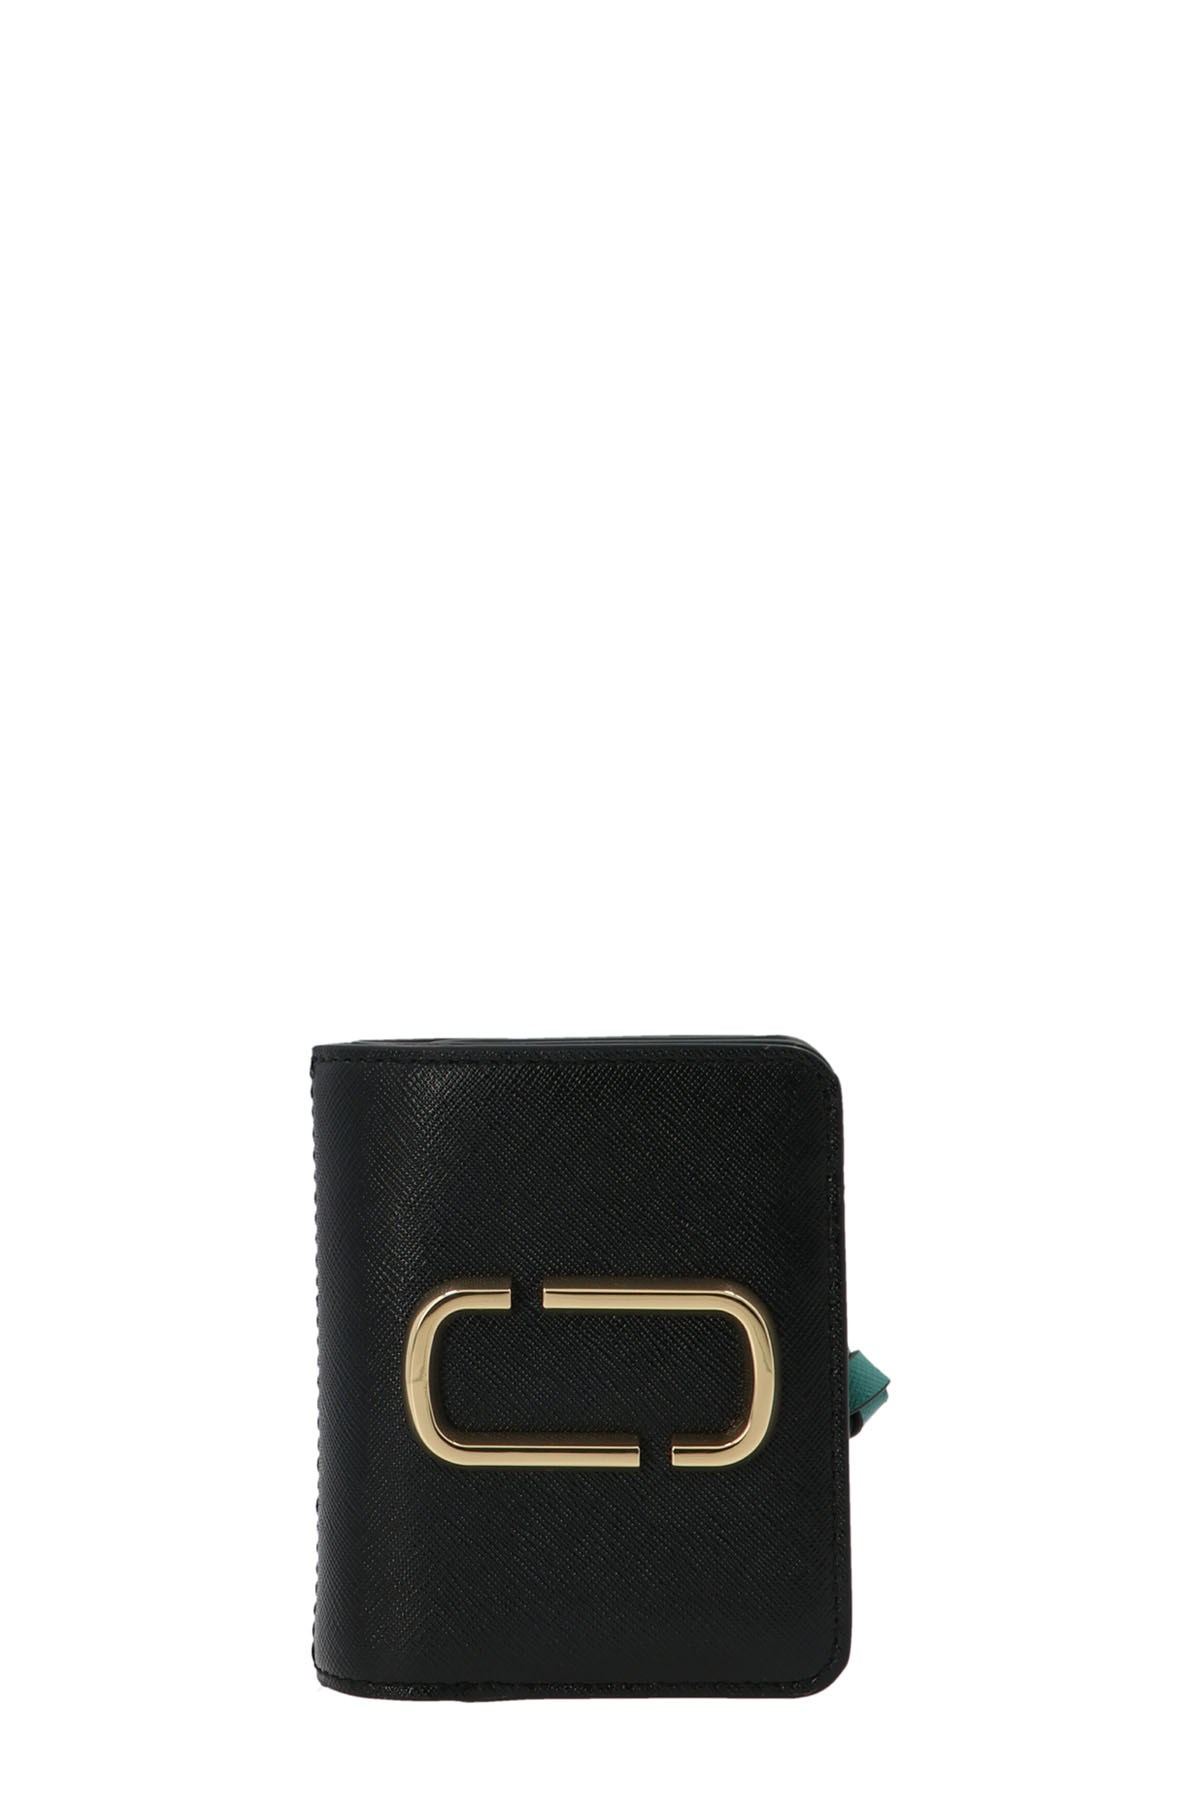 MARC JACOBS 'The Snapshot Mini Compact’ Wallet